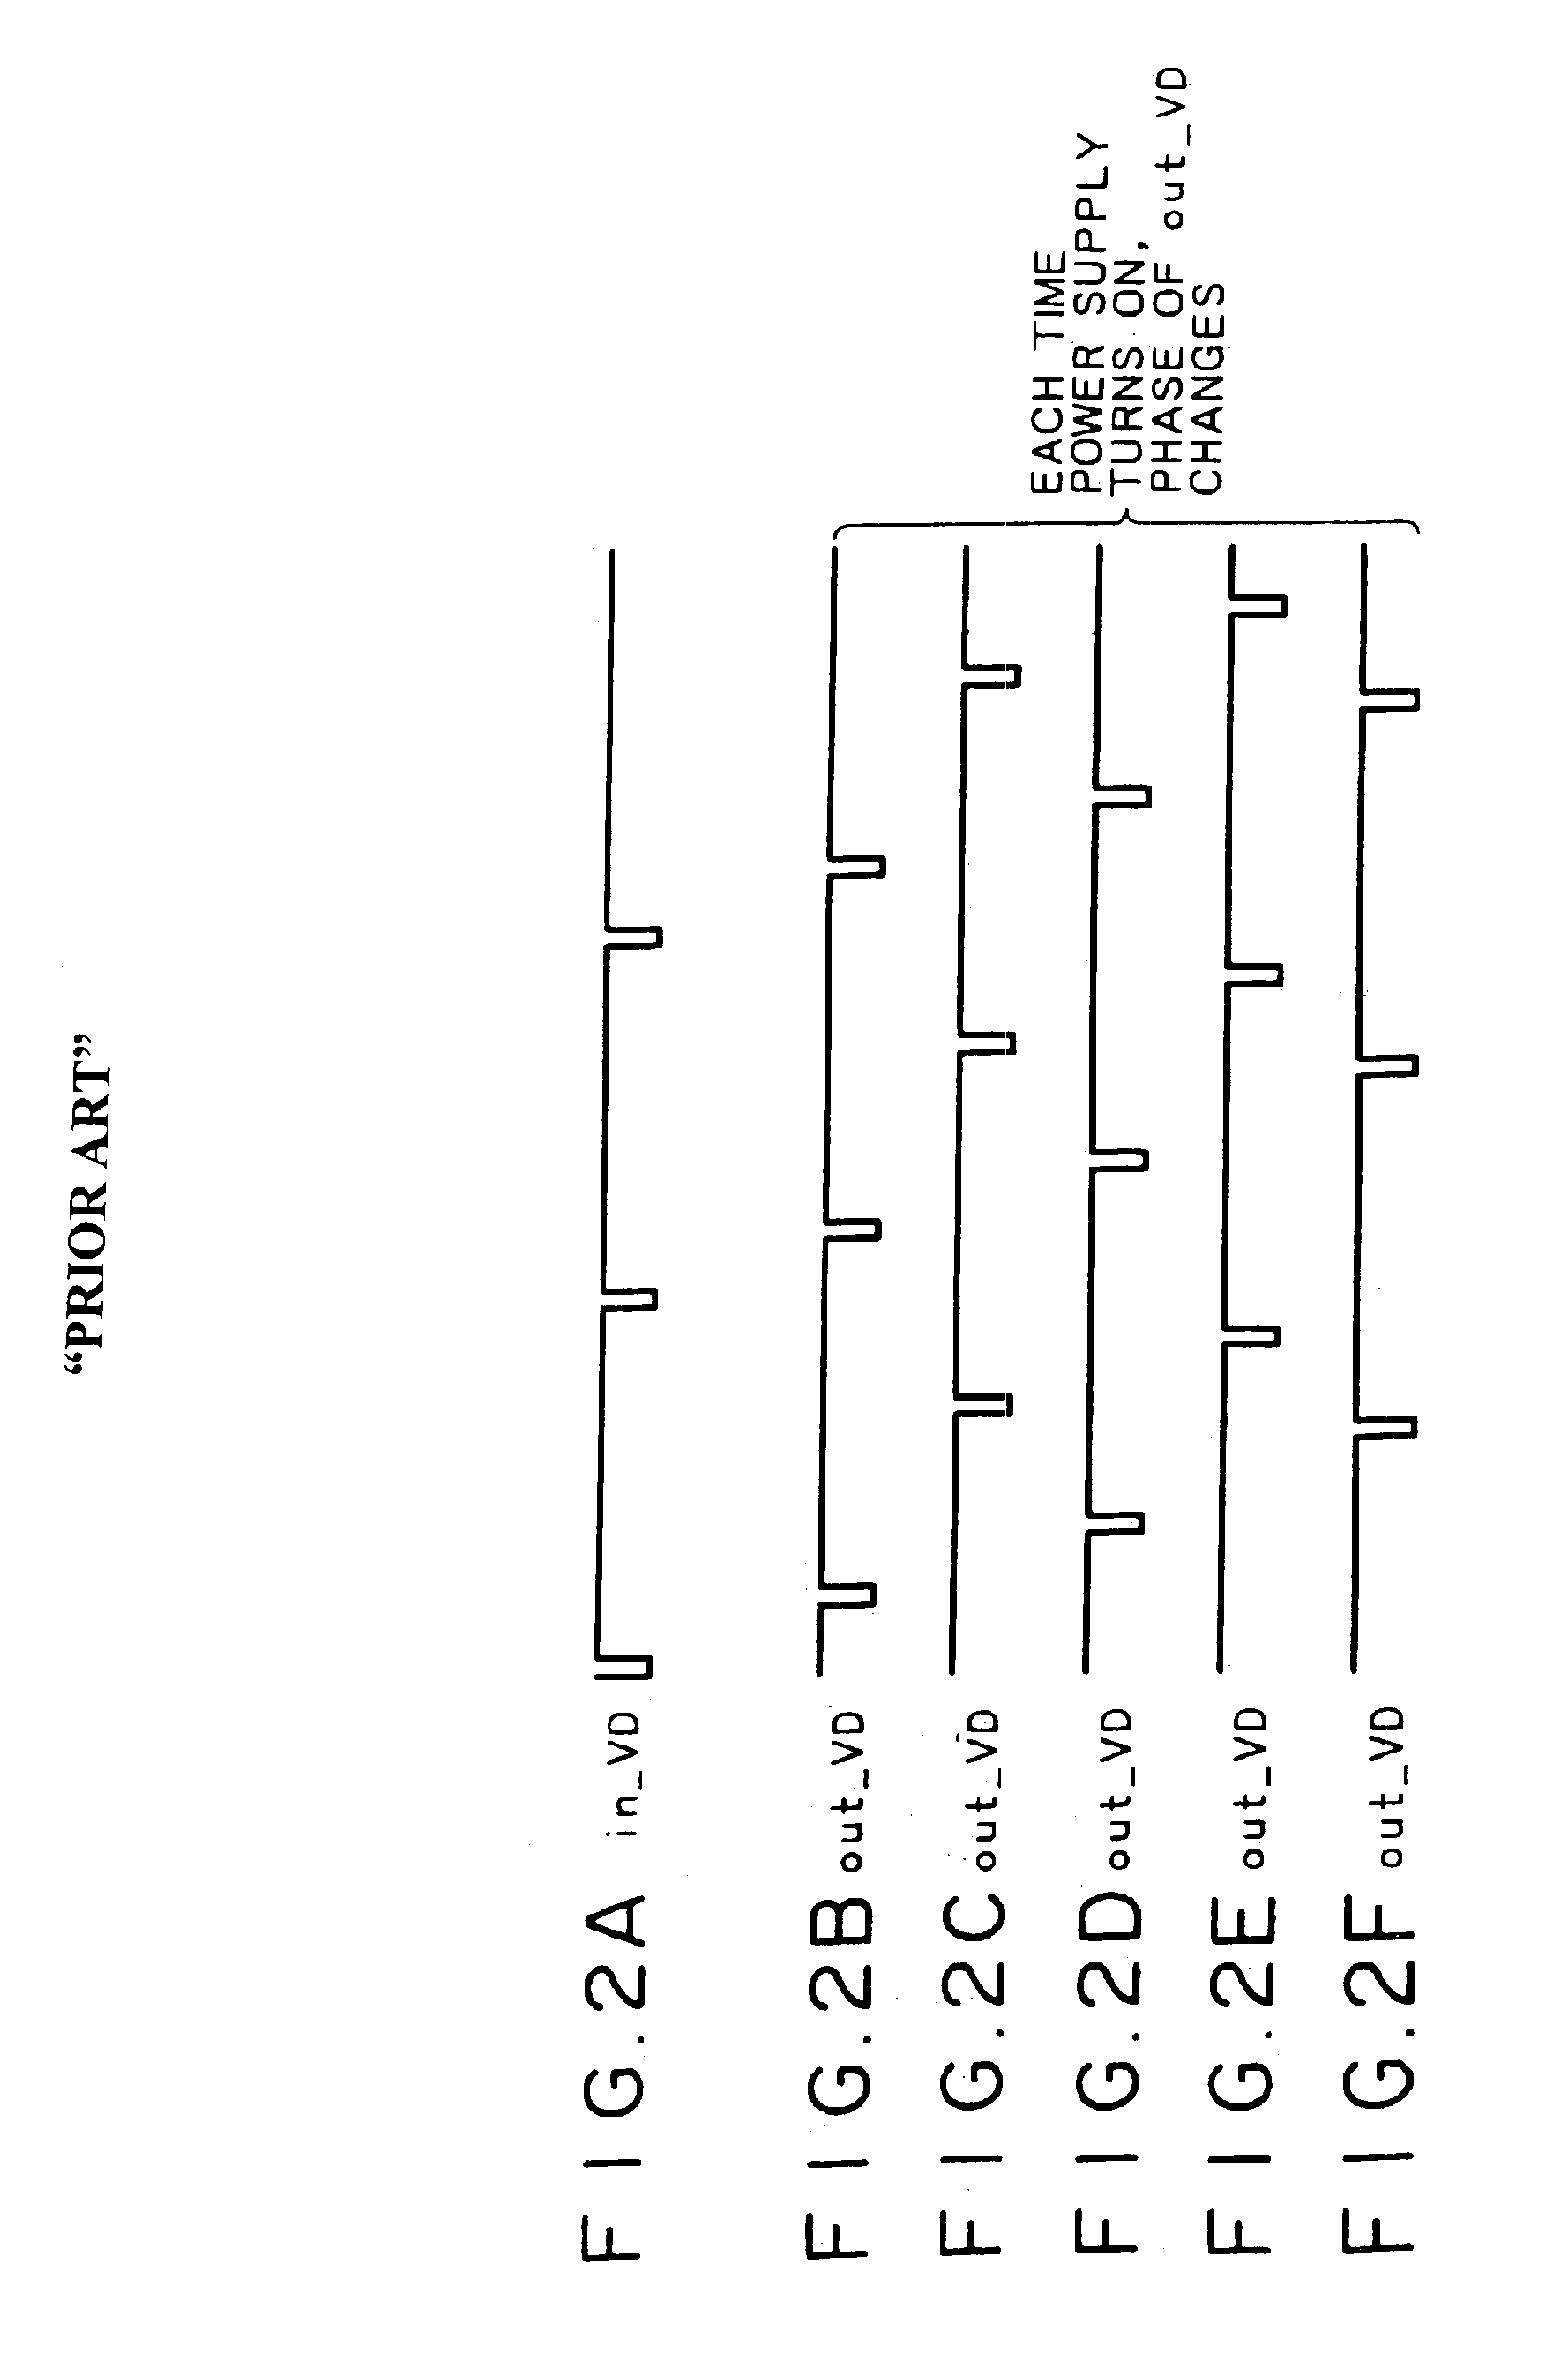 Video signal conversion processing apparatus and method